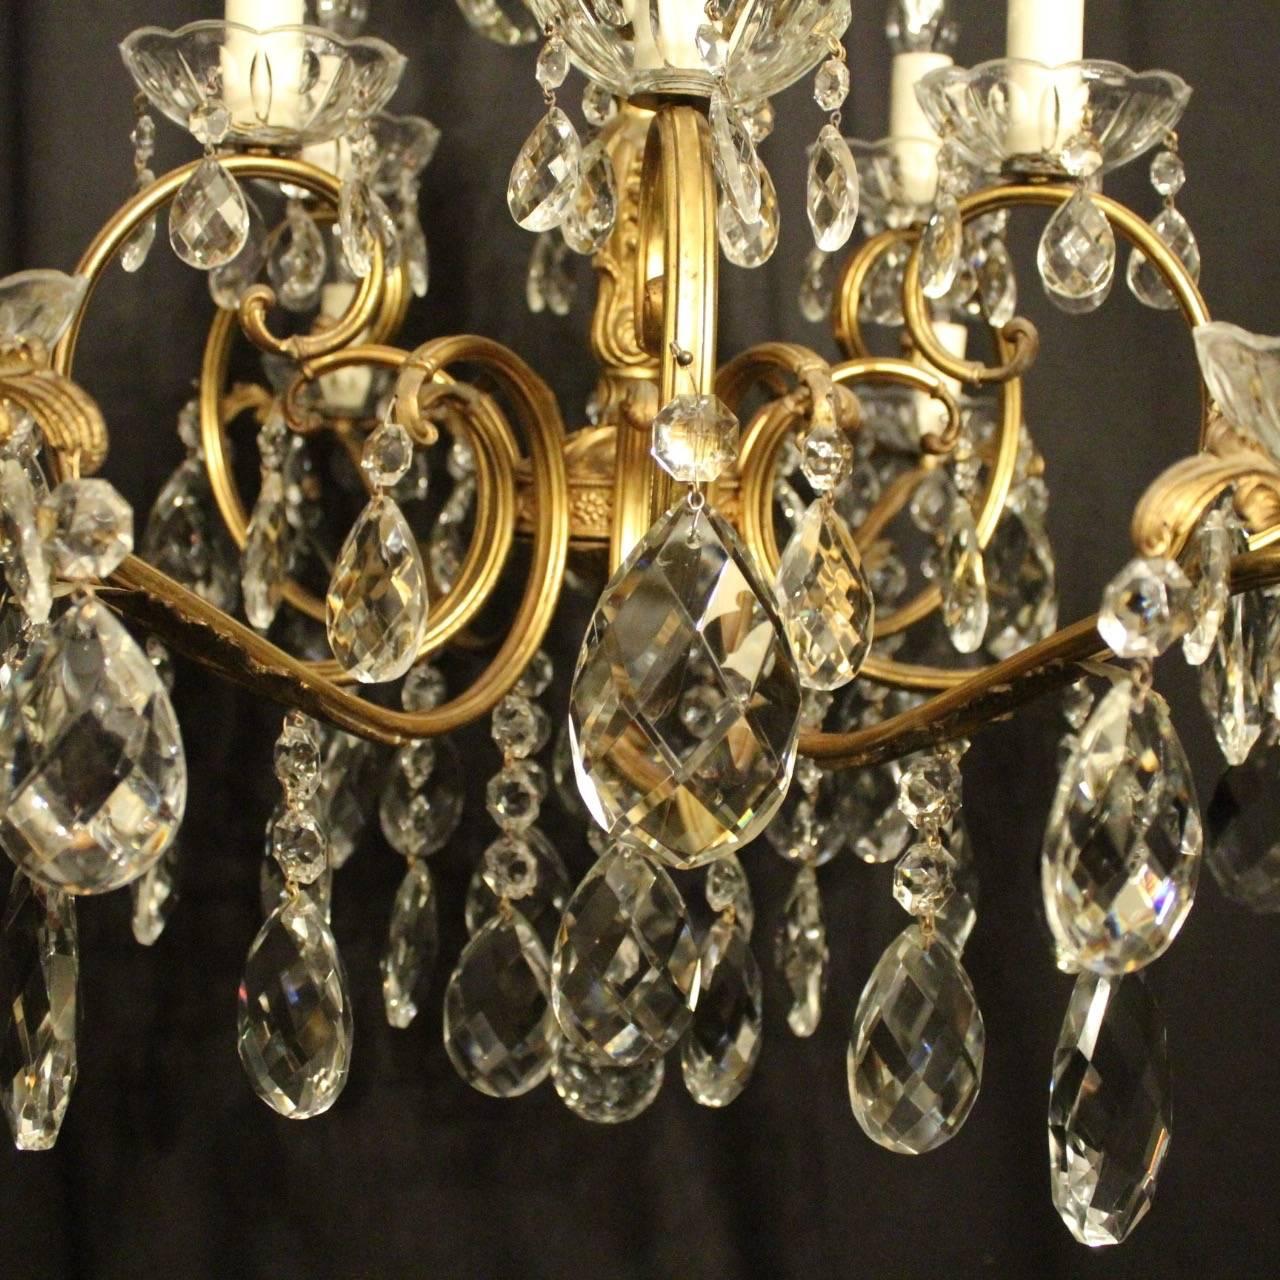 Rococo Revival Italian Gilded and Crystal Twelve-Light Antique Chandelier